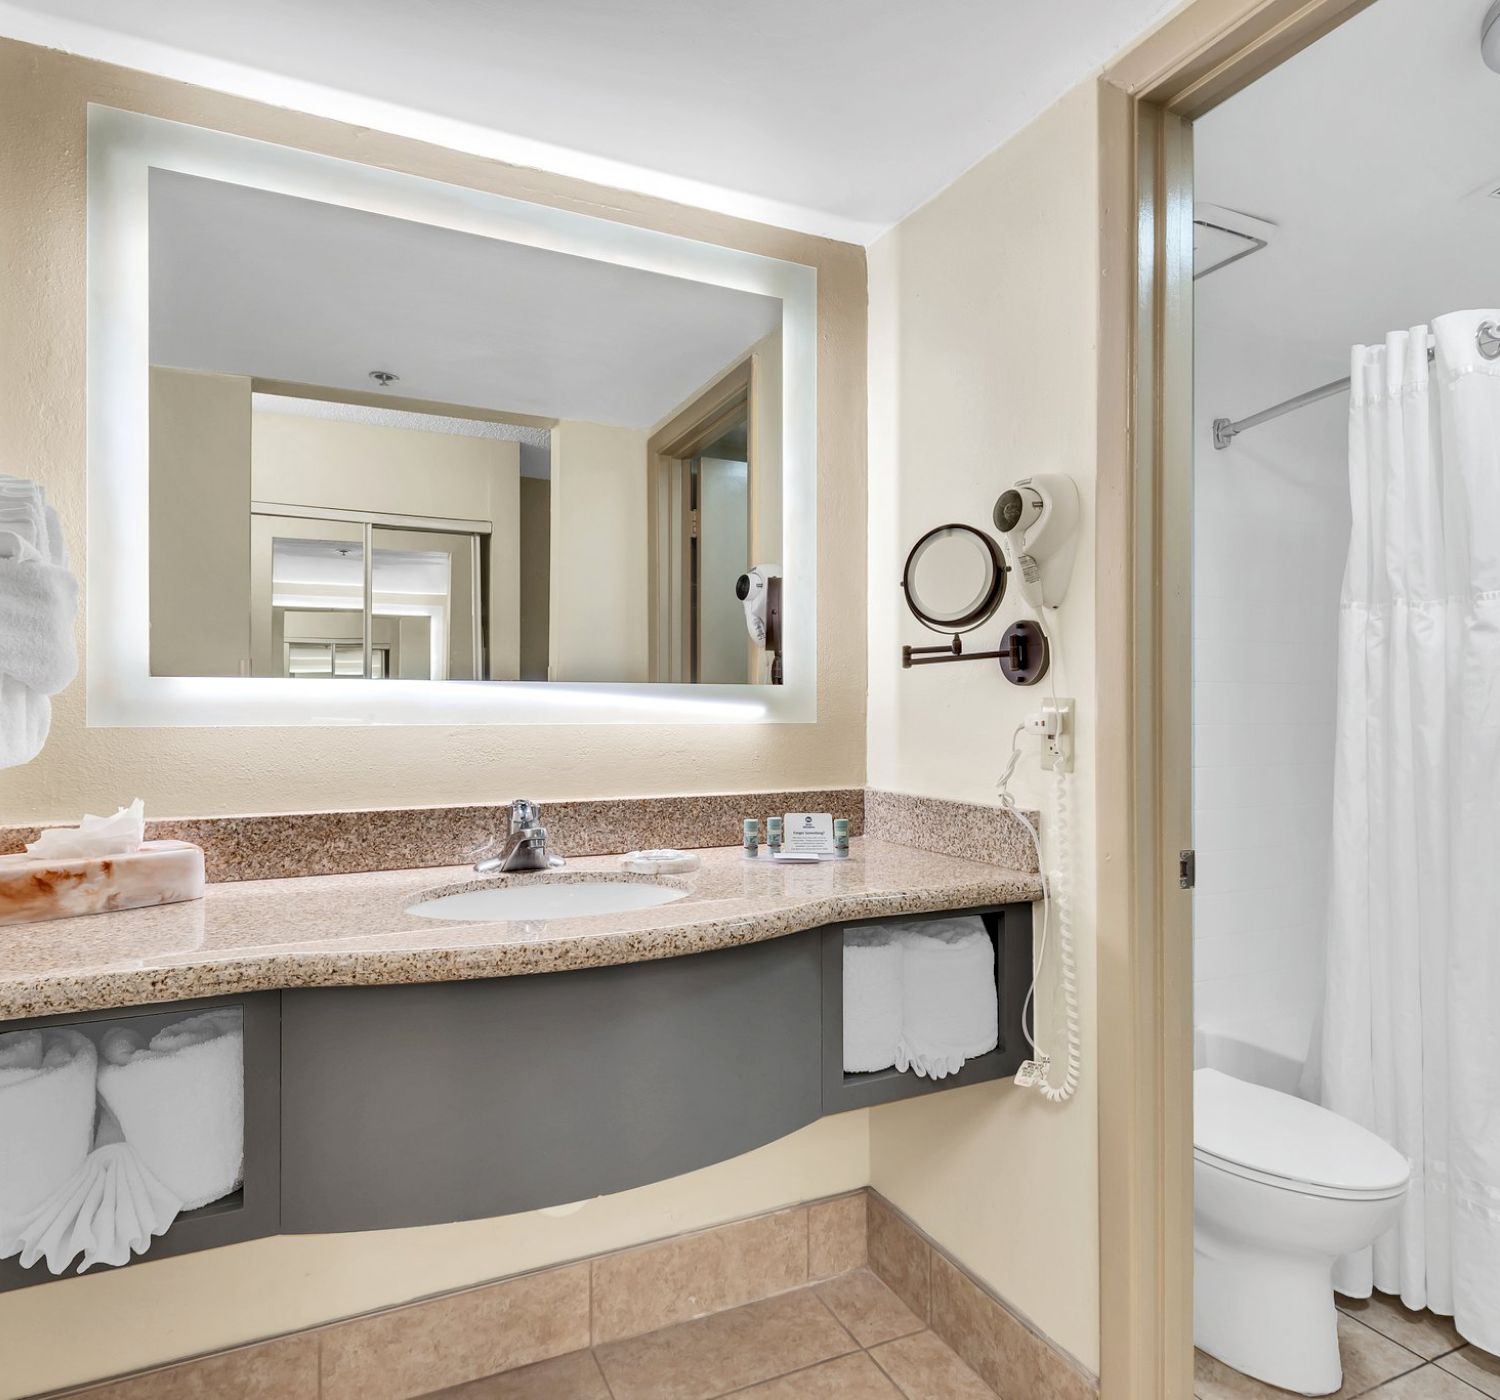 A modern bathroom with a large mirror, sink, towels, and toiletries, adjacent to a shower and toilet with a grab bar and white curtain ending the sentence.